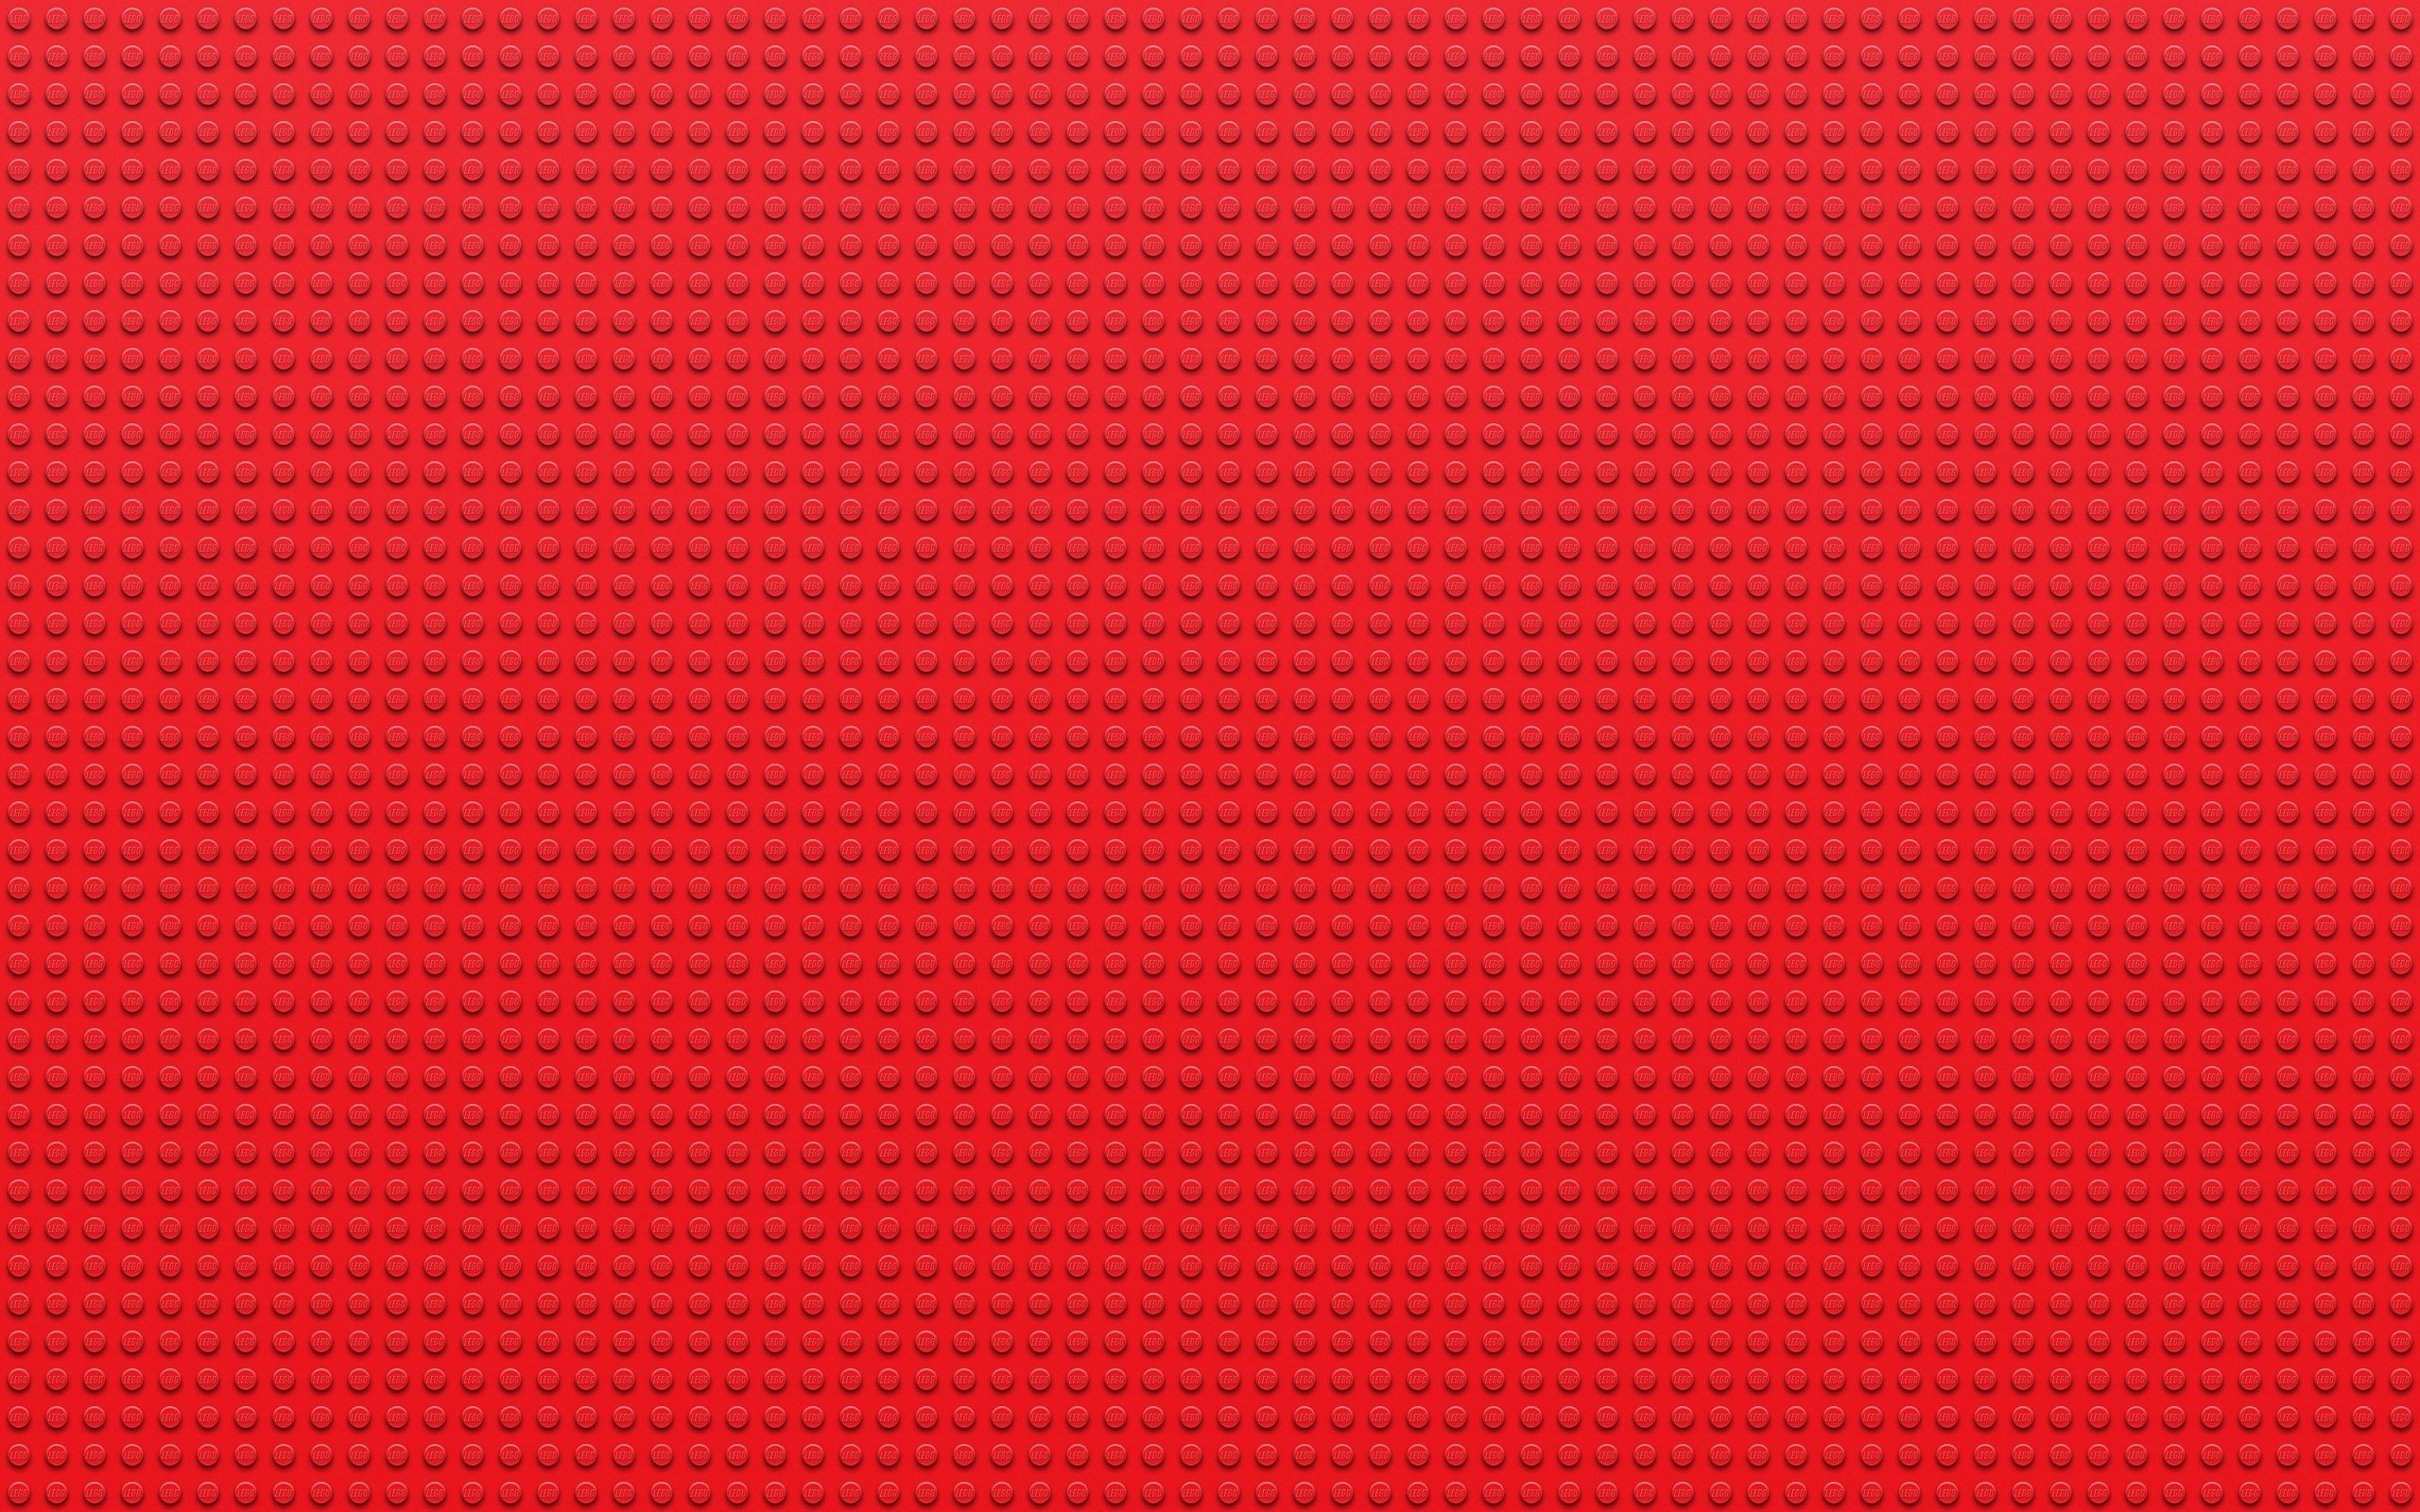 lego, red, circles, texture, textures, points, point